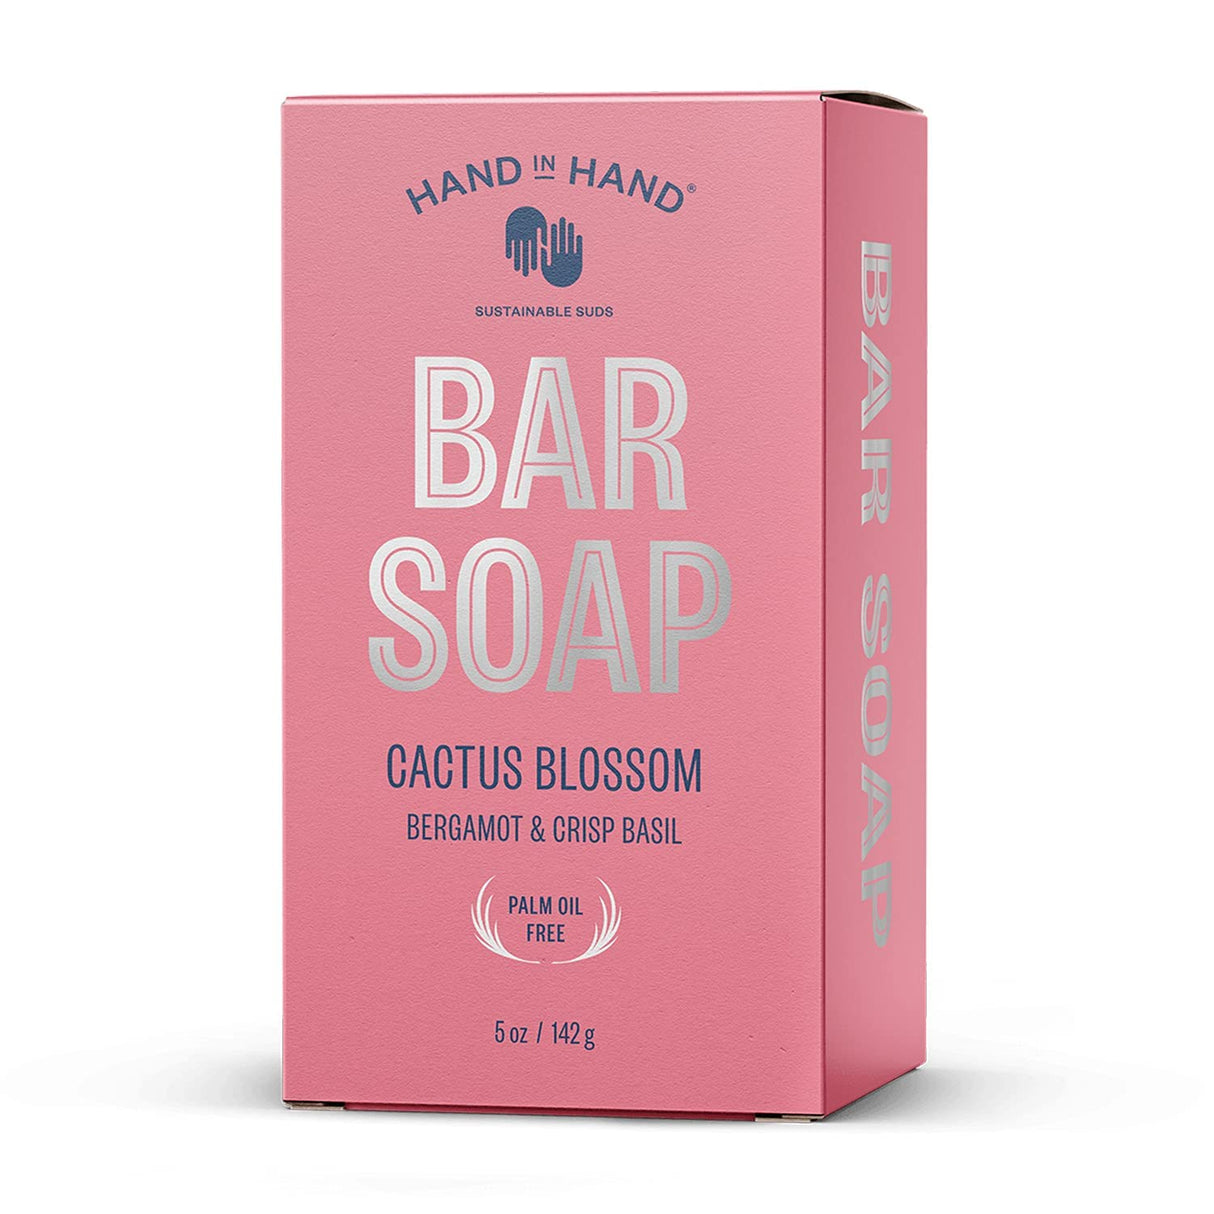 Hand in Hand Bar Soap, Nourishing Cleanser For All Skin Types, Organic Shea and Cocoa Butters, 5 Ounce, Bergamot & Crisp Basil, Cactus Blossom Scent, Single